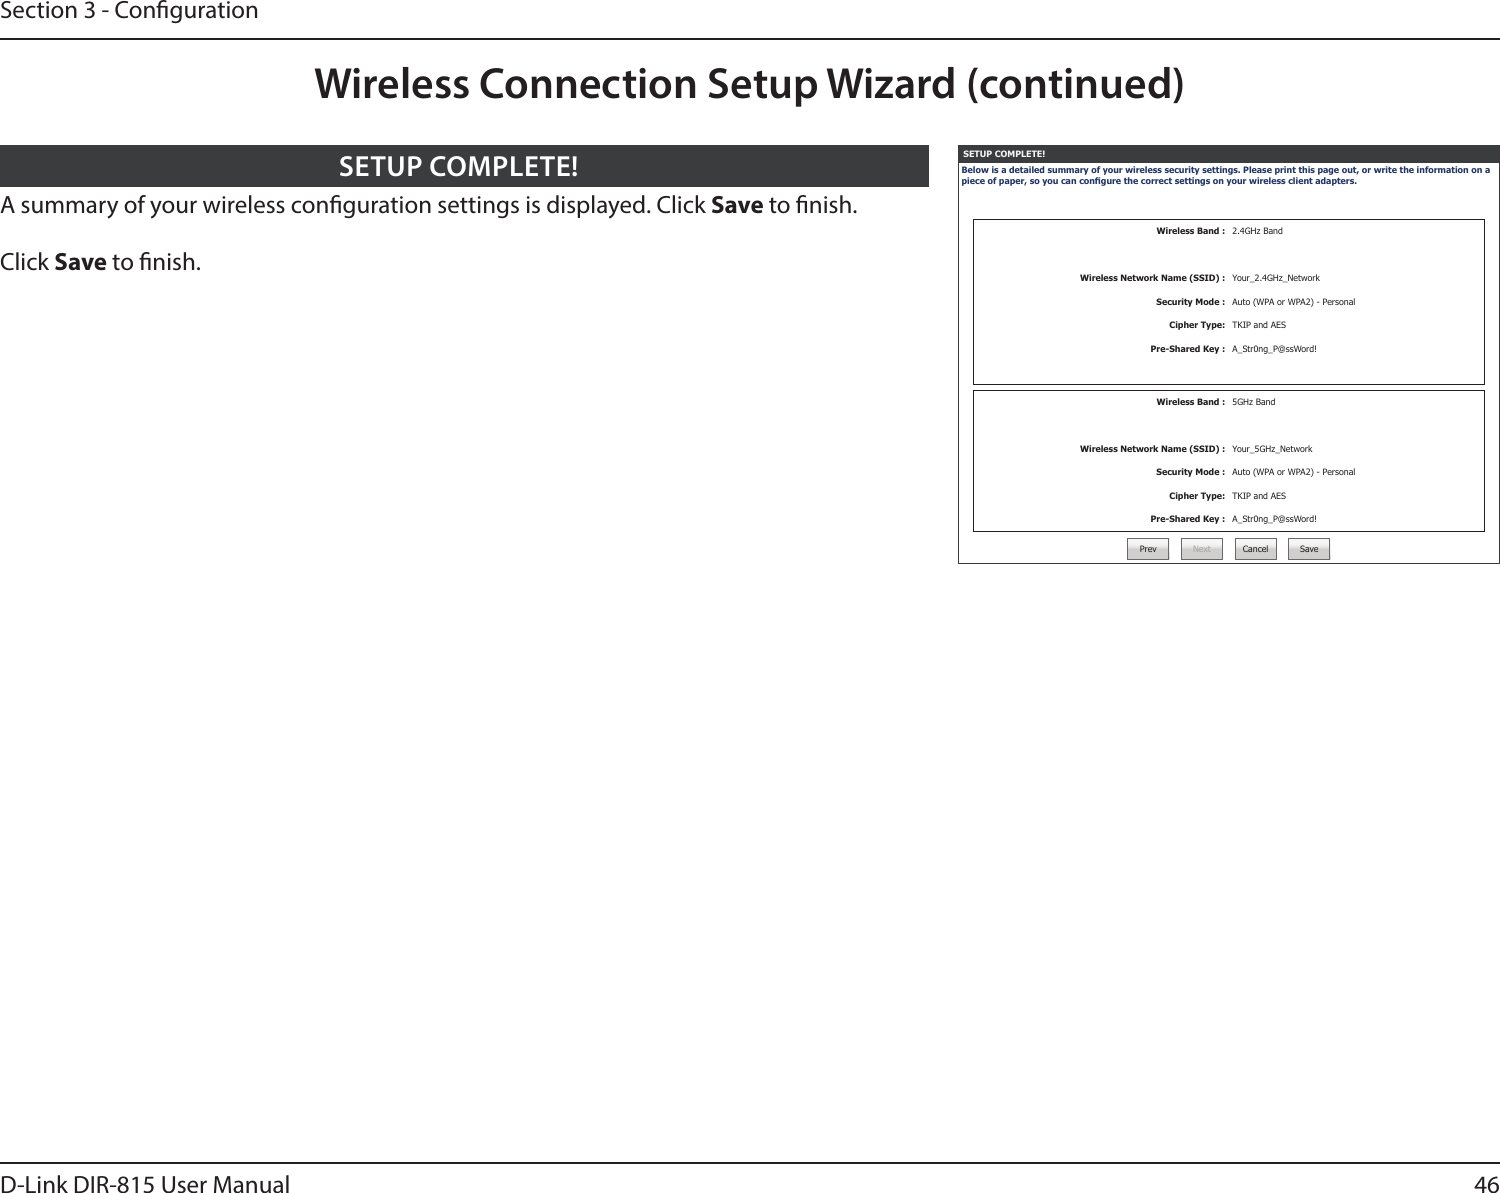 46D-Link DIR-815 User ManualSection 3 - CongurationSETUP COMPLETE!Below is a detailed summary of your wireless security settings. Please print this page out, or write the information on a piece of paper, so you can congure the correct settings on your wireless client adapters.Wireless Band : 2.4GHz BandWireless Network Name (SSID) : Your_2.4GHz_NetworkSecurity Mode : Auto (WPA or WPA2) - PersonalCipher Type: TKIP and AESPre-Shared Key : A_Str0ng_P@ssWord!Wireless Band : 5GHz BandWireless Network Name (SSID) : Your_5GHz_NetworkSecurity Mode : Auto (WPA or WPA2) - PersonalCipher Type: TKIP and AESPre-Shared Key : A_Str0ng_P@ssWord!Prev Next Cancel SaveA summary of your wireless conguration settings is displayed. Click Save to nish.Click Save to nish.SETUP COMPLETE!Wireless Connection Setup Wizard (continued)